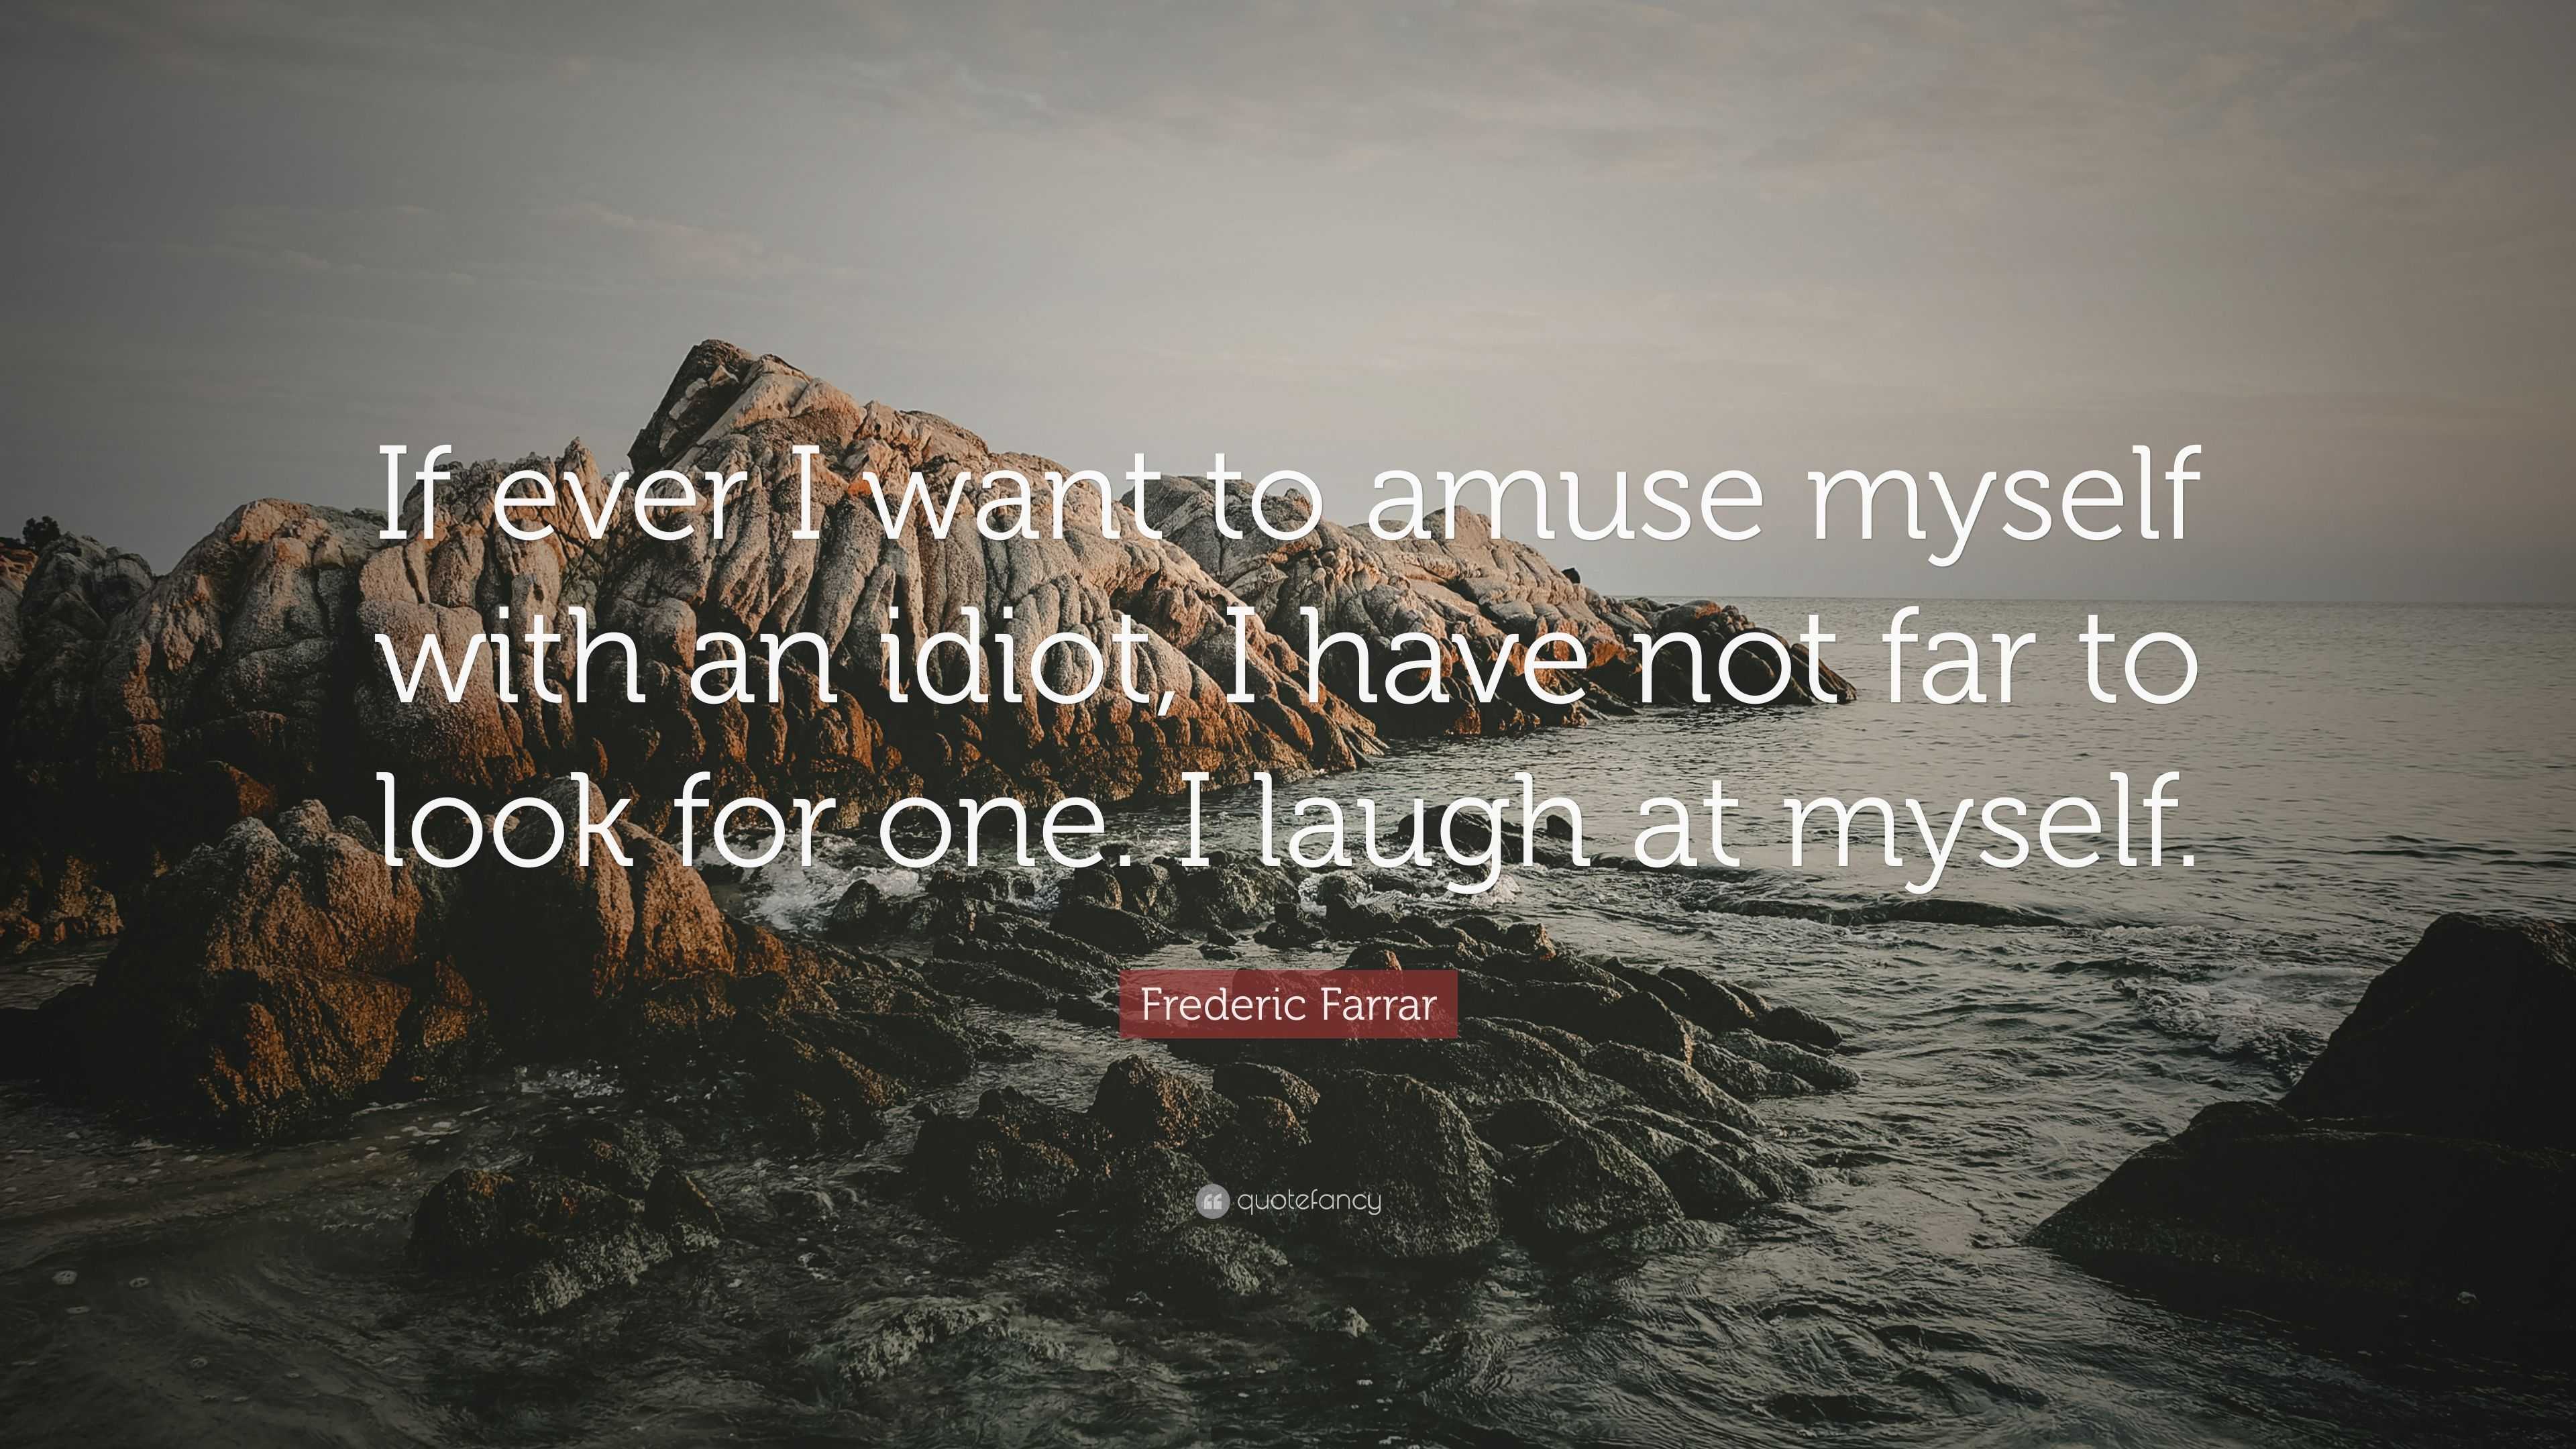 5761892-Frederic-Farrar-Quote-If-ever-I-want-to-amuse-myself-with-an-idiot.jpg